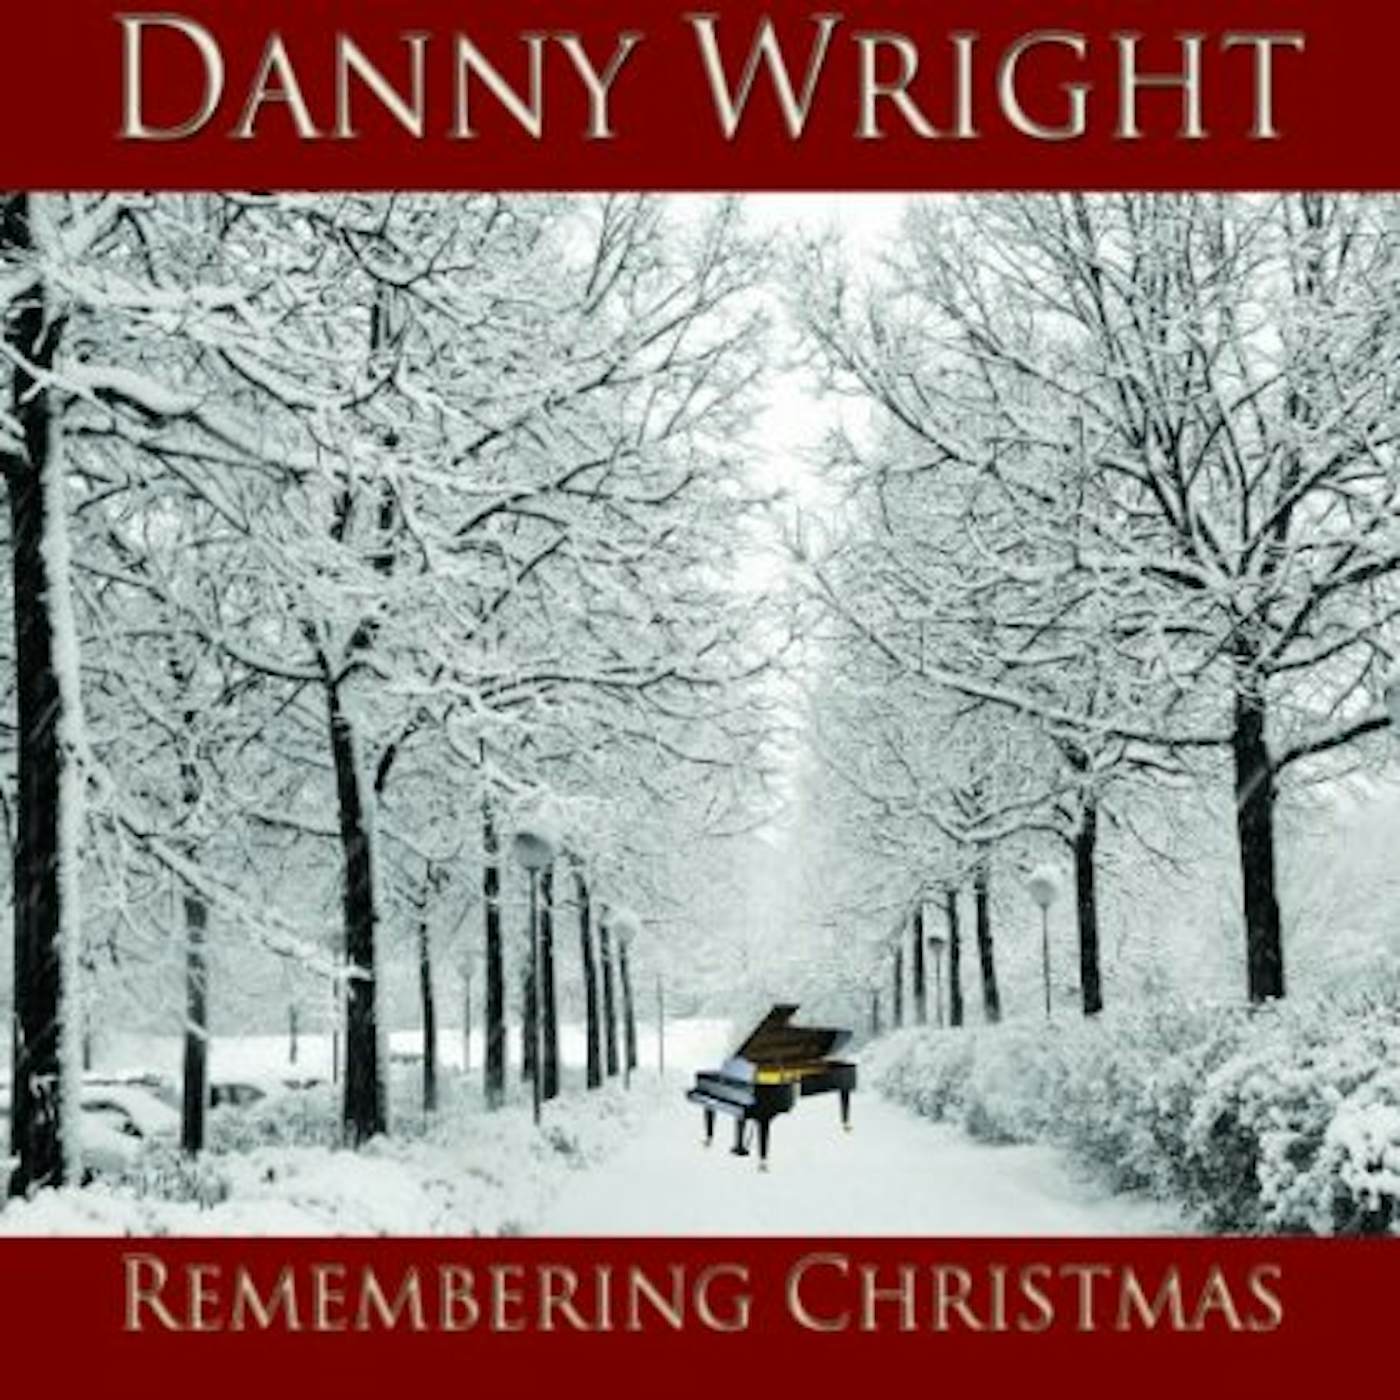 Danny Wright REMEMBERING CHRISTMAS CD